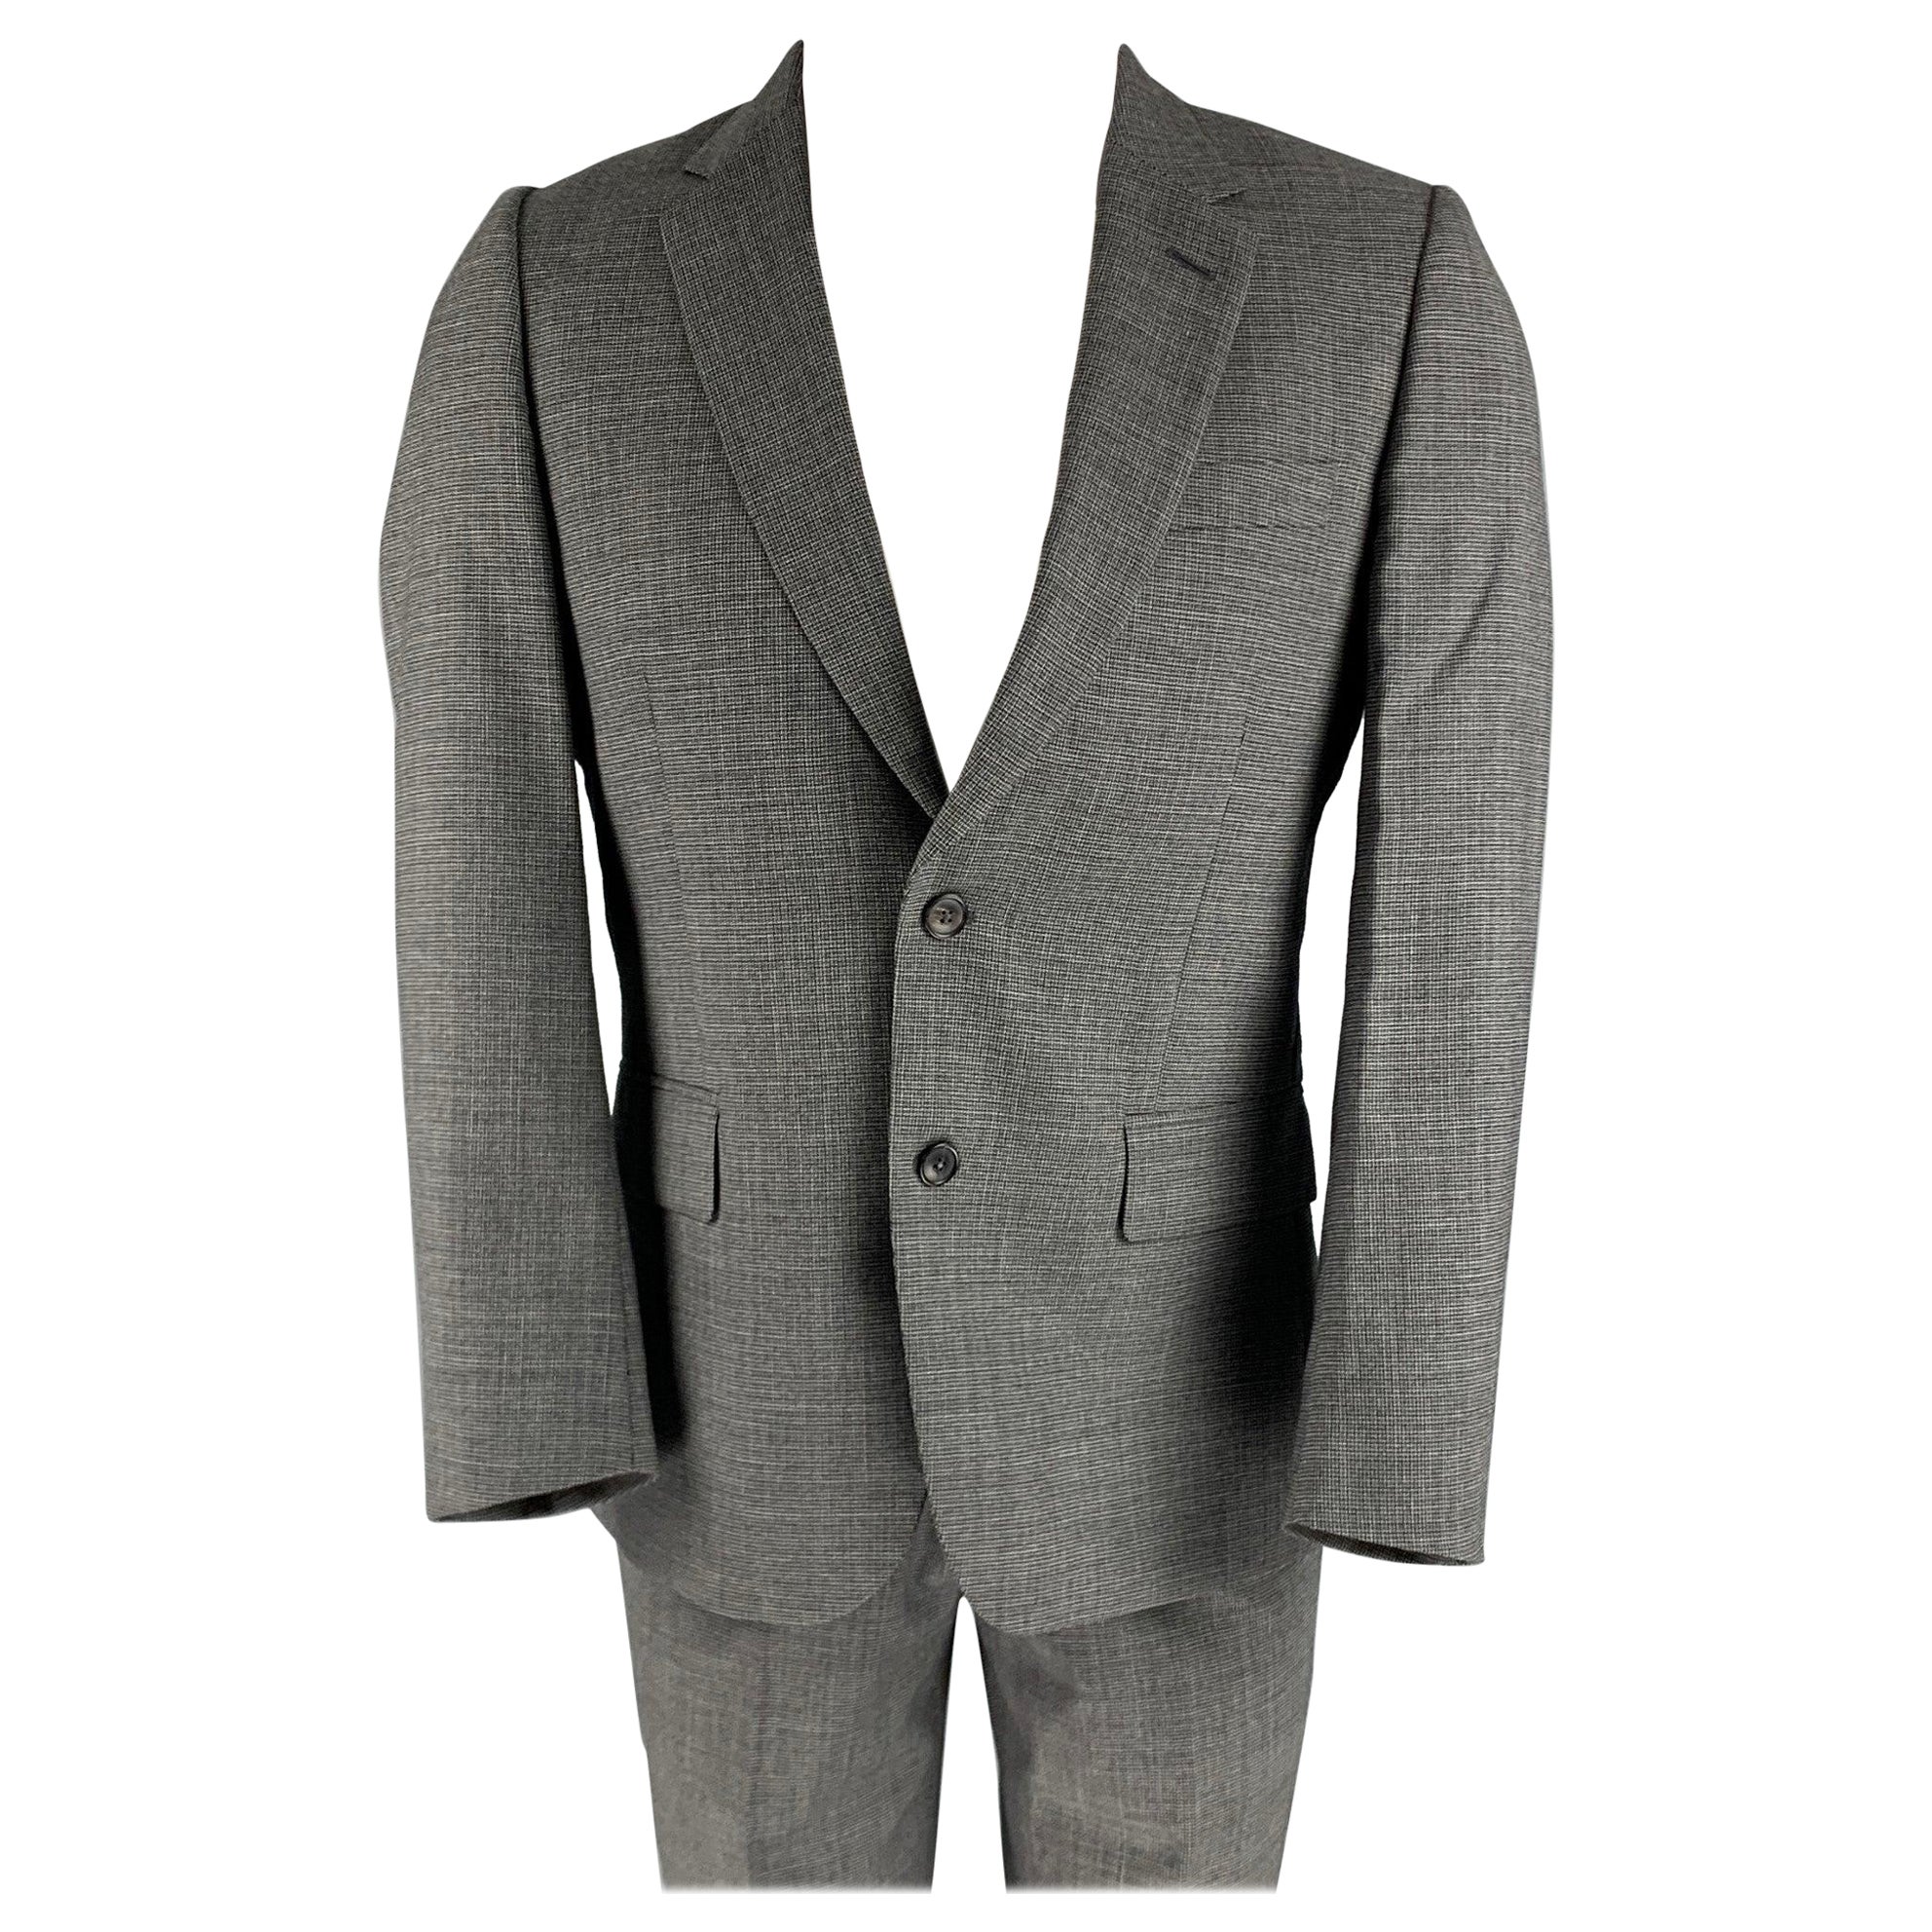 PAUL SMITH Chest Size 38 Grey Black Basketweave Wool Suit For Sale